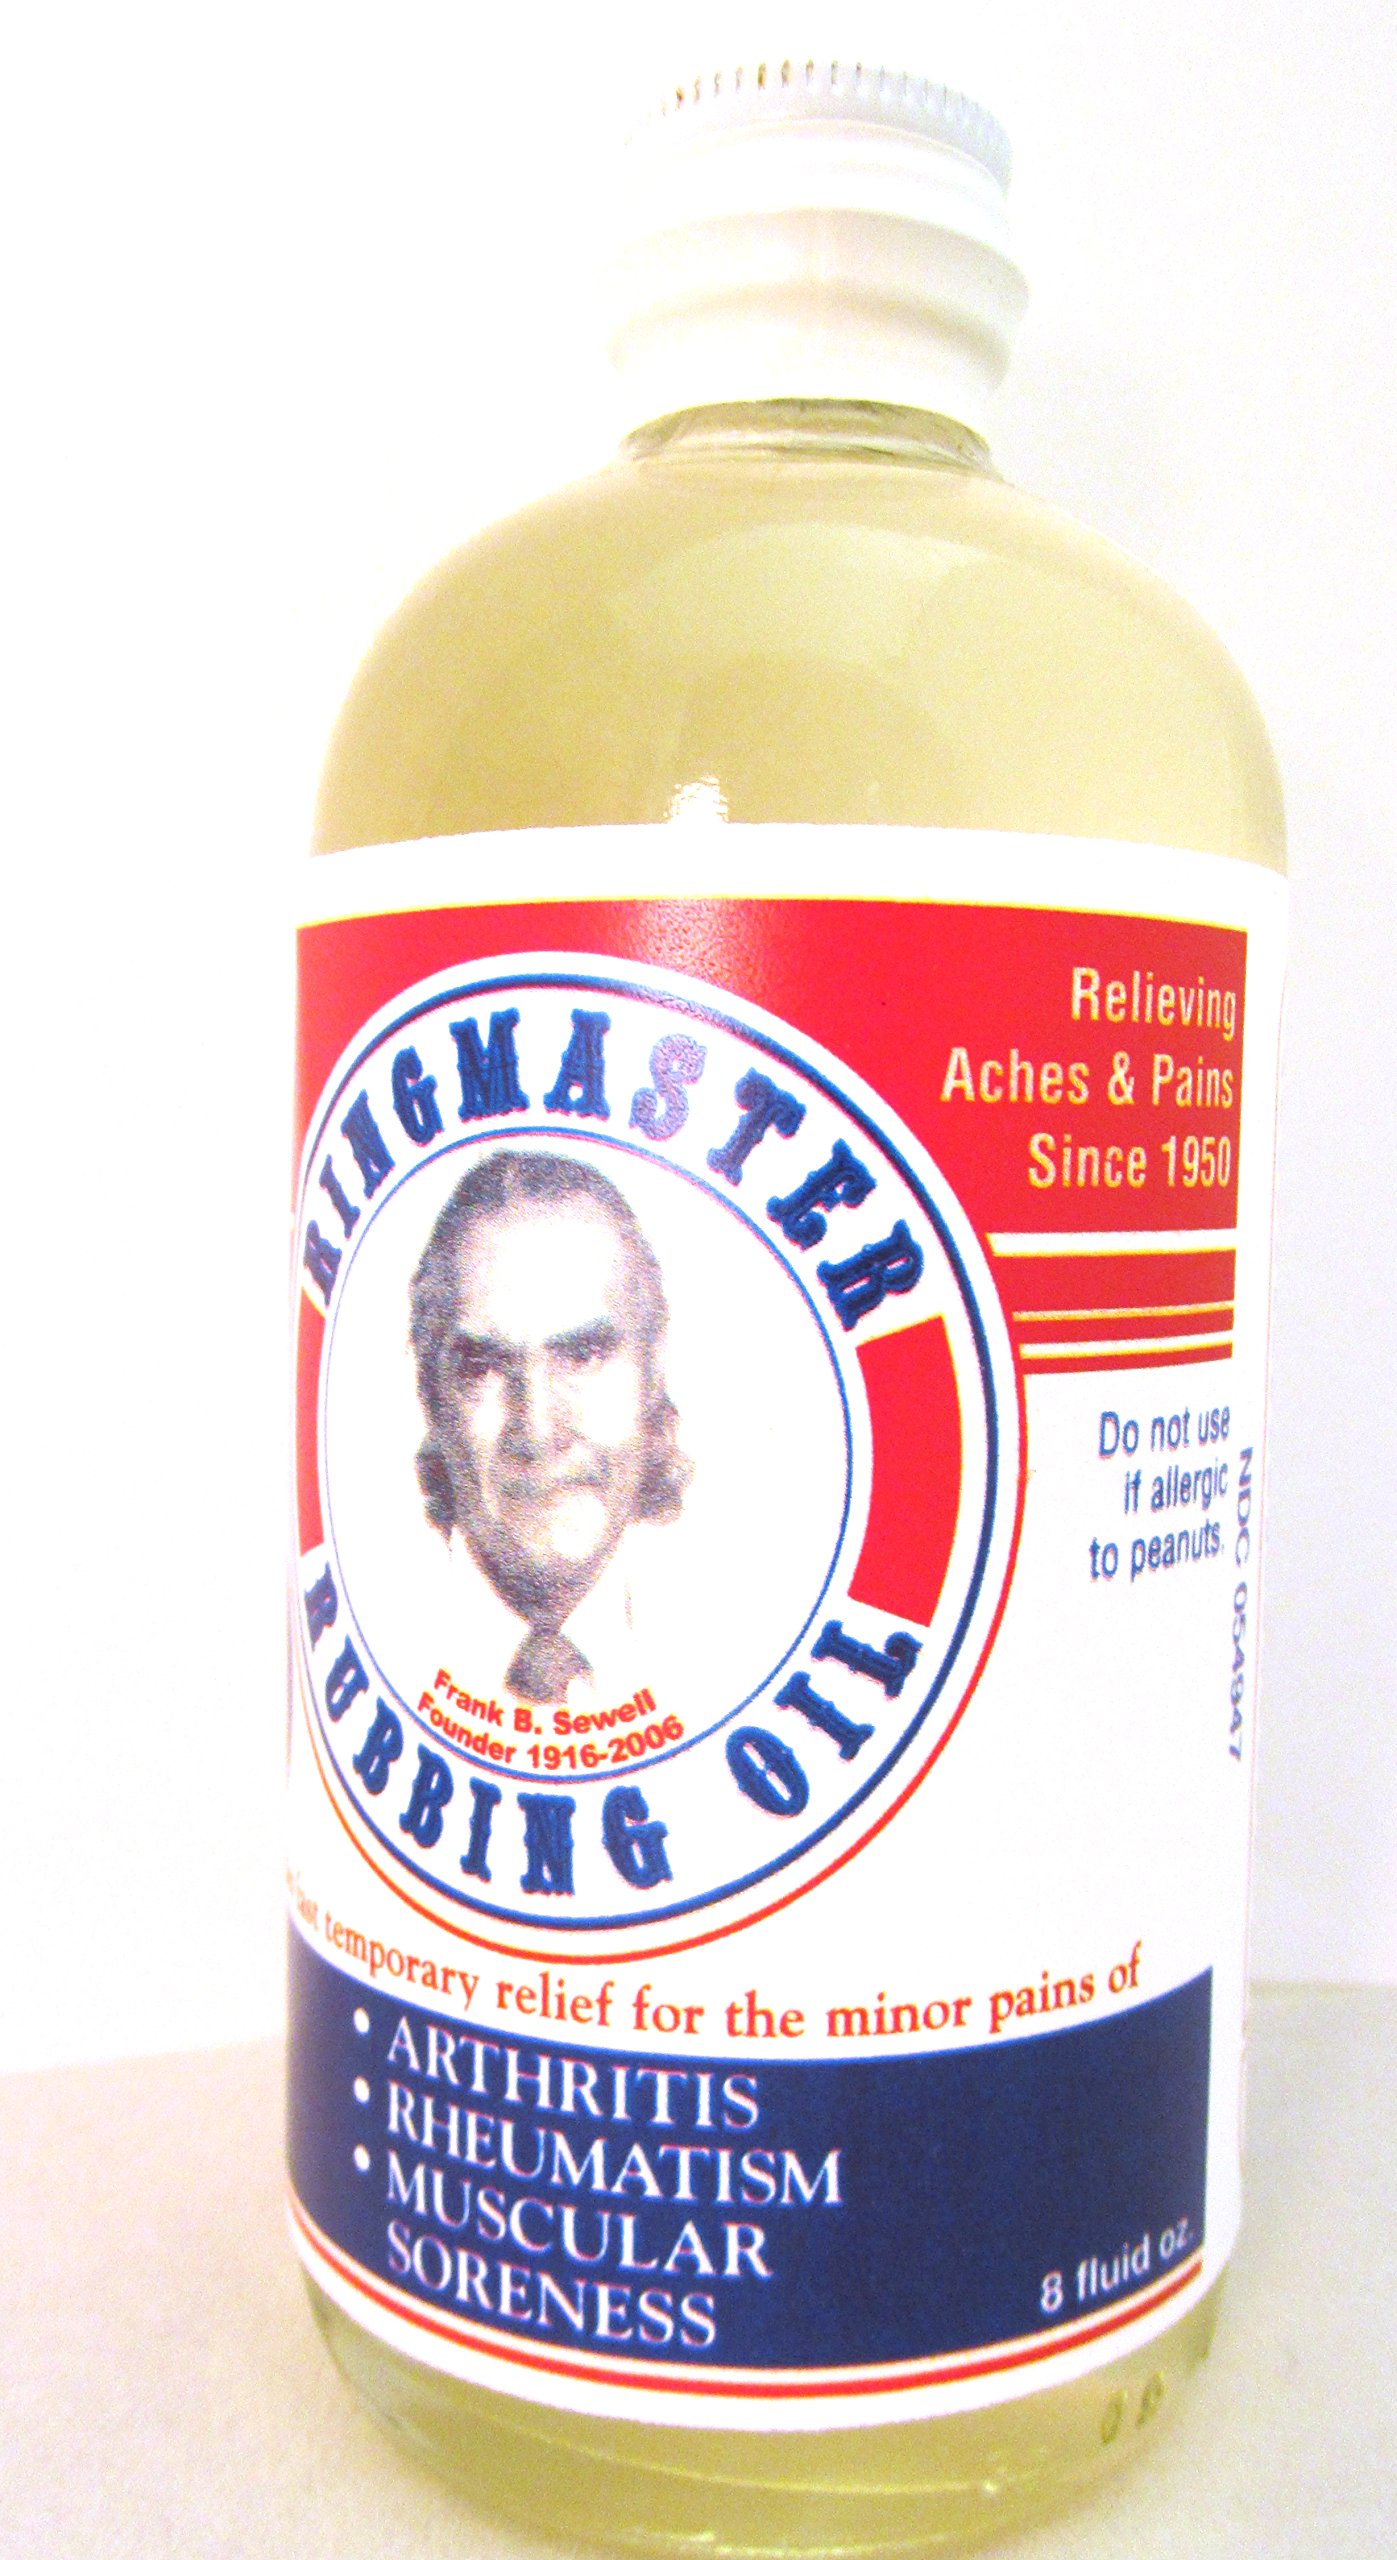 Ringmaster Pain Relief Rub, Rubbing Oil - Quick Relief for Arthritis, Joint Pain, Back Pain, Sore Muscles, Carpal Tunnel, Sore Feet, Athlete's ...